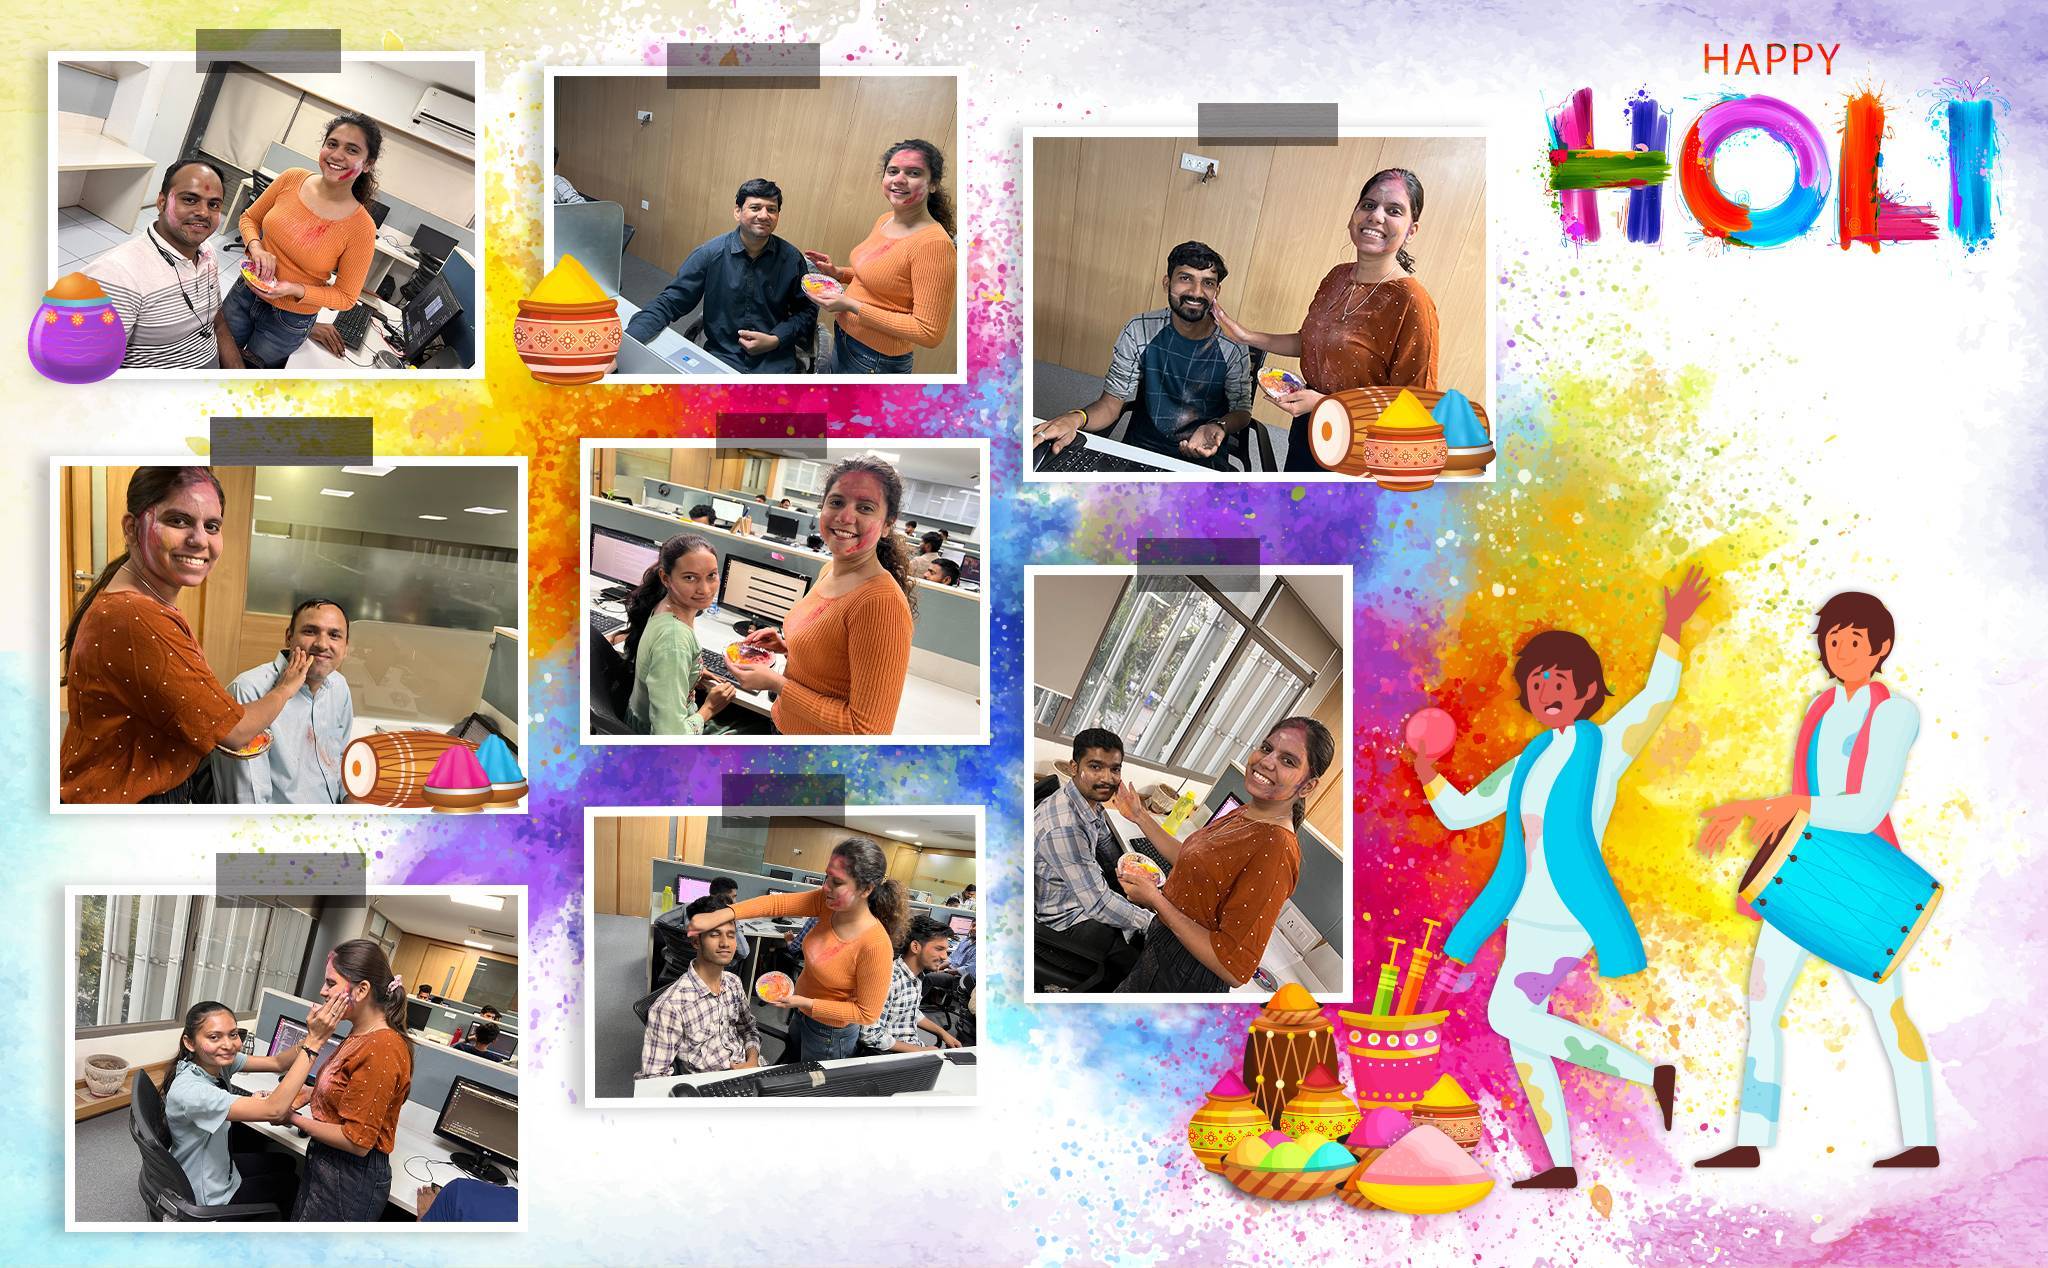 Silicon family celebrated Holi with a lot of enjoyment! Yes, at Silicon, we know to maintain a work-life balance.